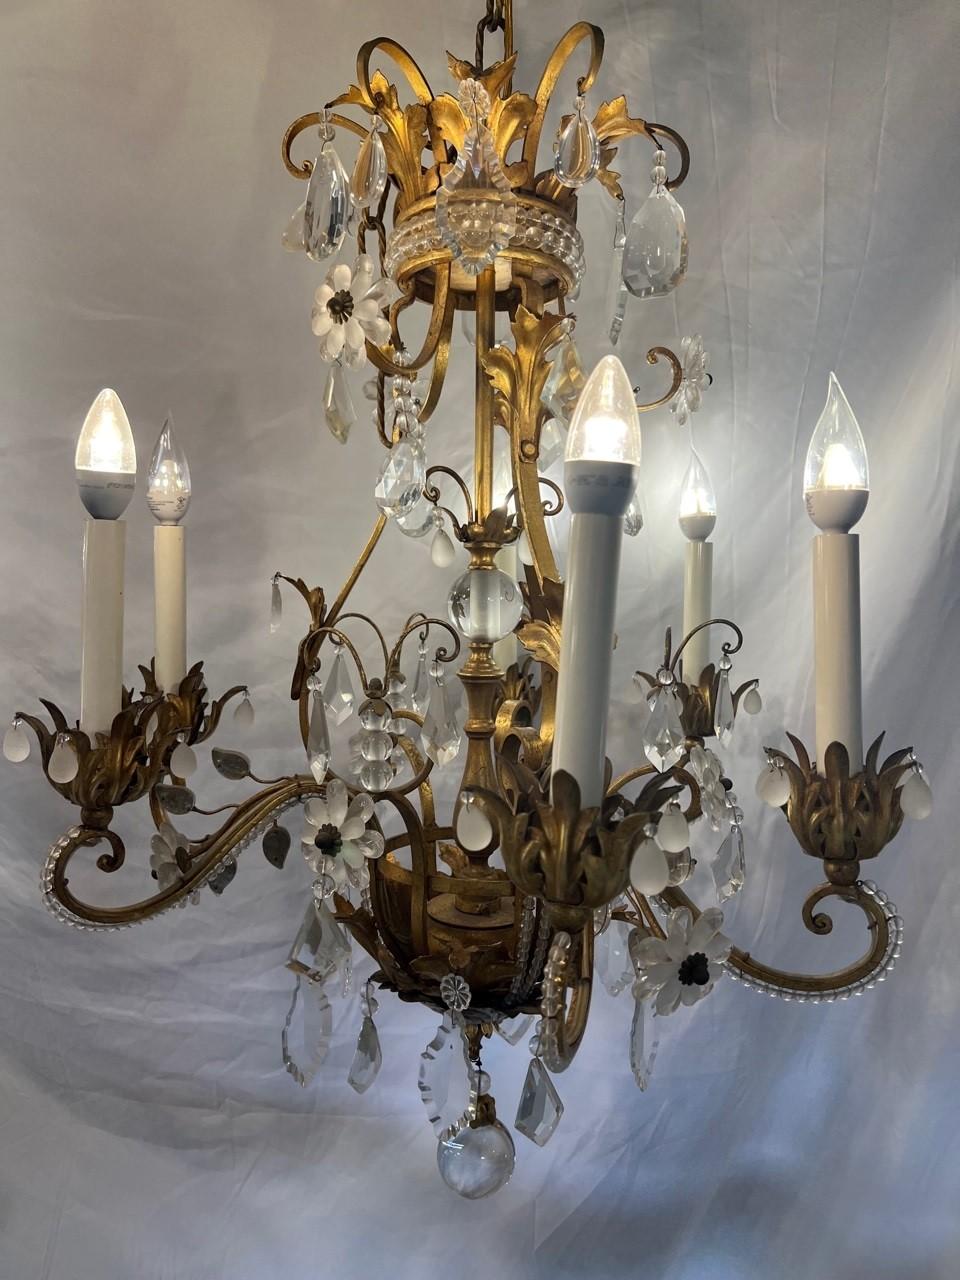 Gorgeous Italian six arm crystal and iron chandelier with antique brass finish very good quality. This is a beautiful chandelier with crystal flowers and hand beaded crystal on each arm. Its a great size that would look amazing over a dining room